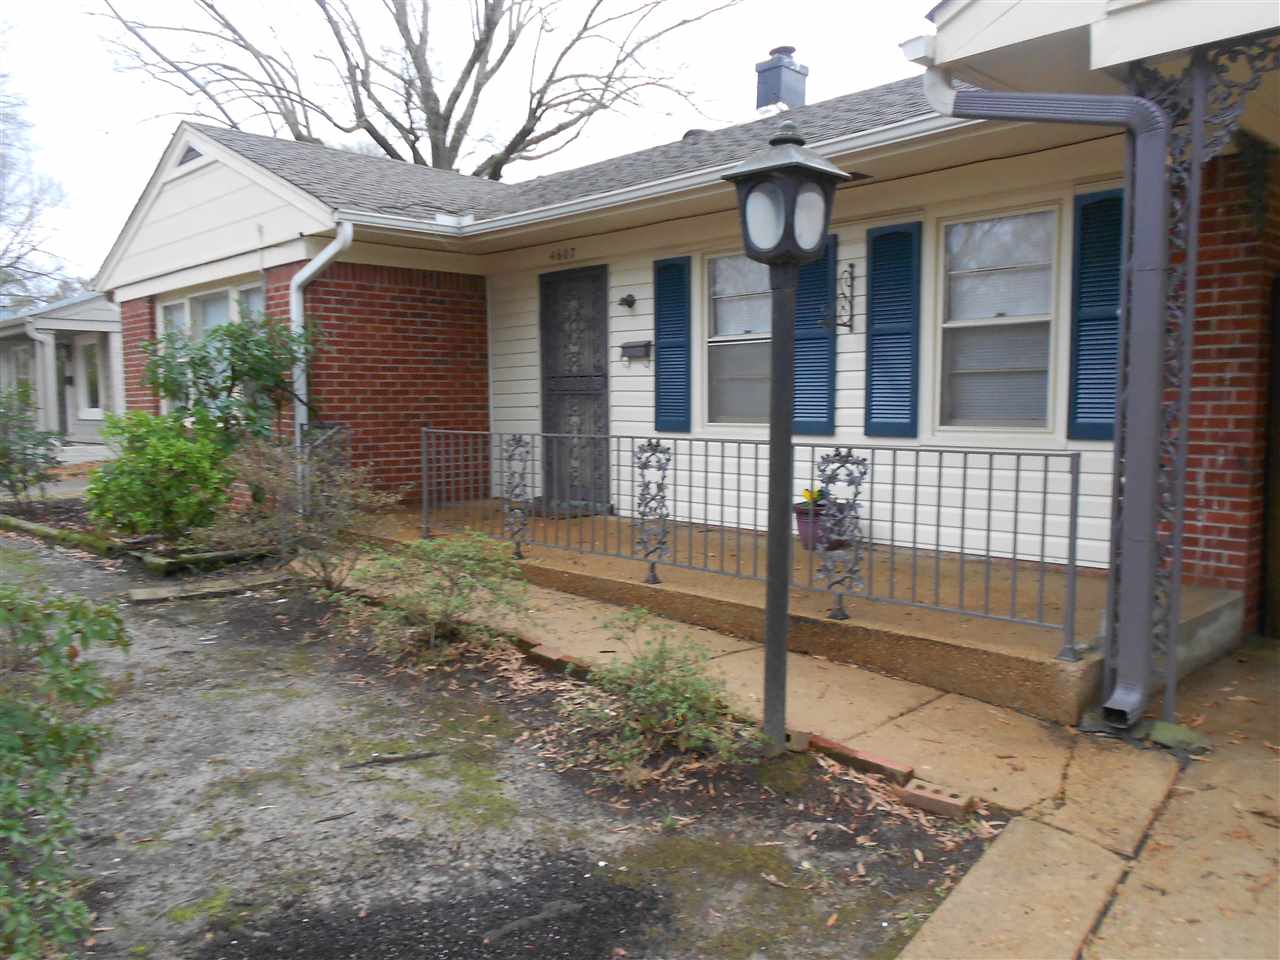 SWEET COVERED FRONT PORCH AND LOW MAINTAINENCE EXTERIOR WITH ALL VINYL SIDING AND BRICK.